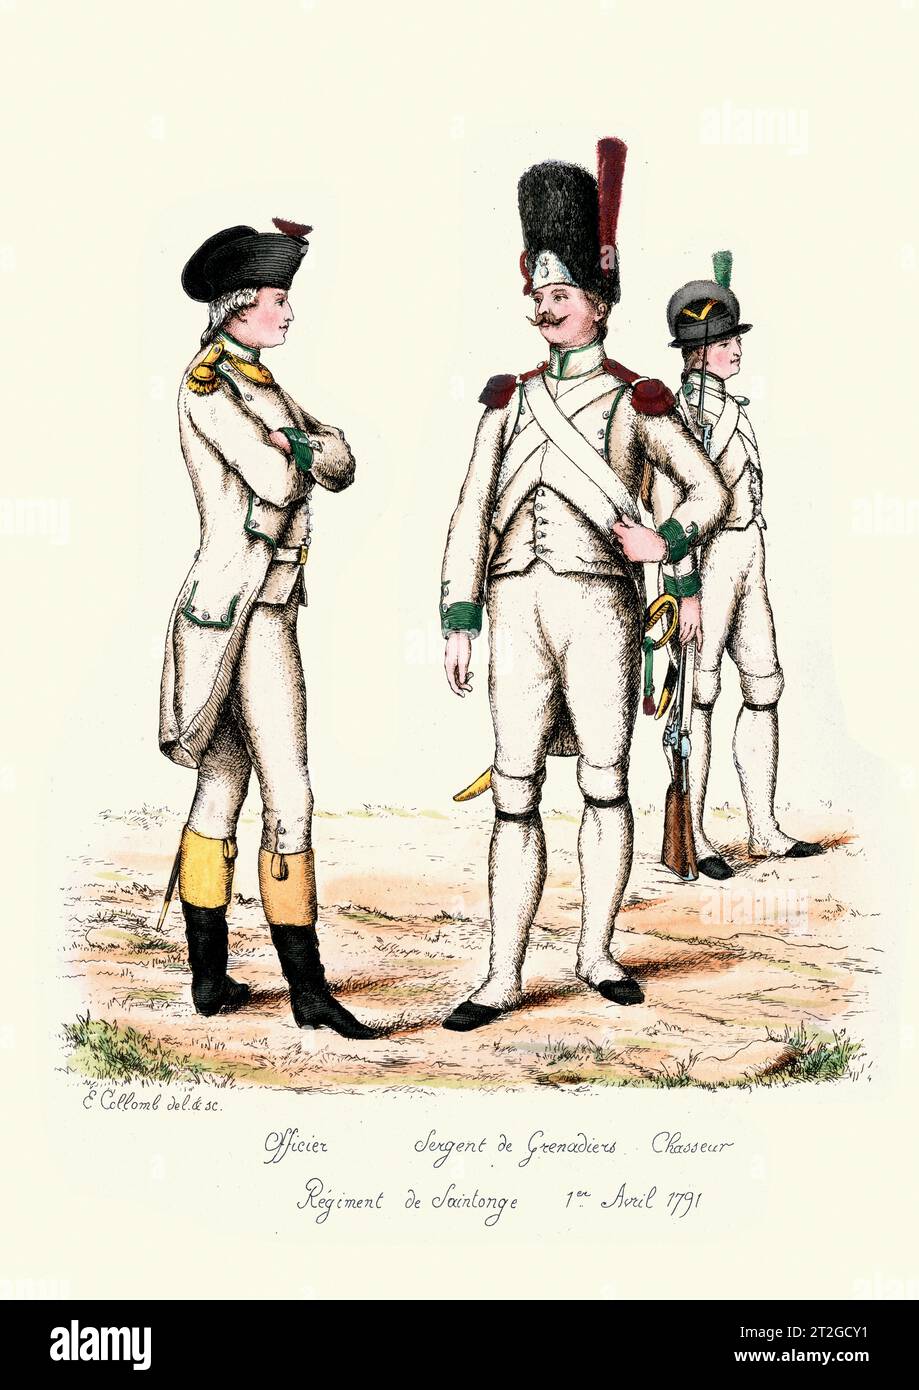 French Military Uniforms, 18th Century, History, Infantry soliders, Officer, sergeant of grenadier, Chasseur, Regiment de Saintonge Stock Photo